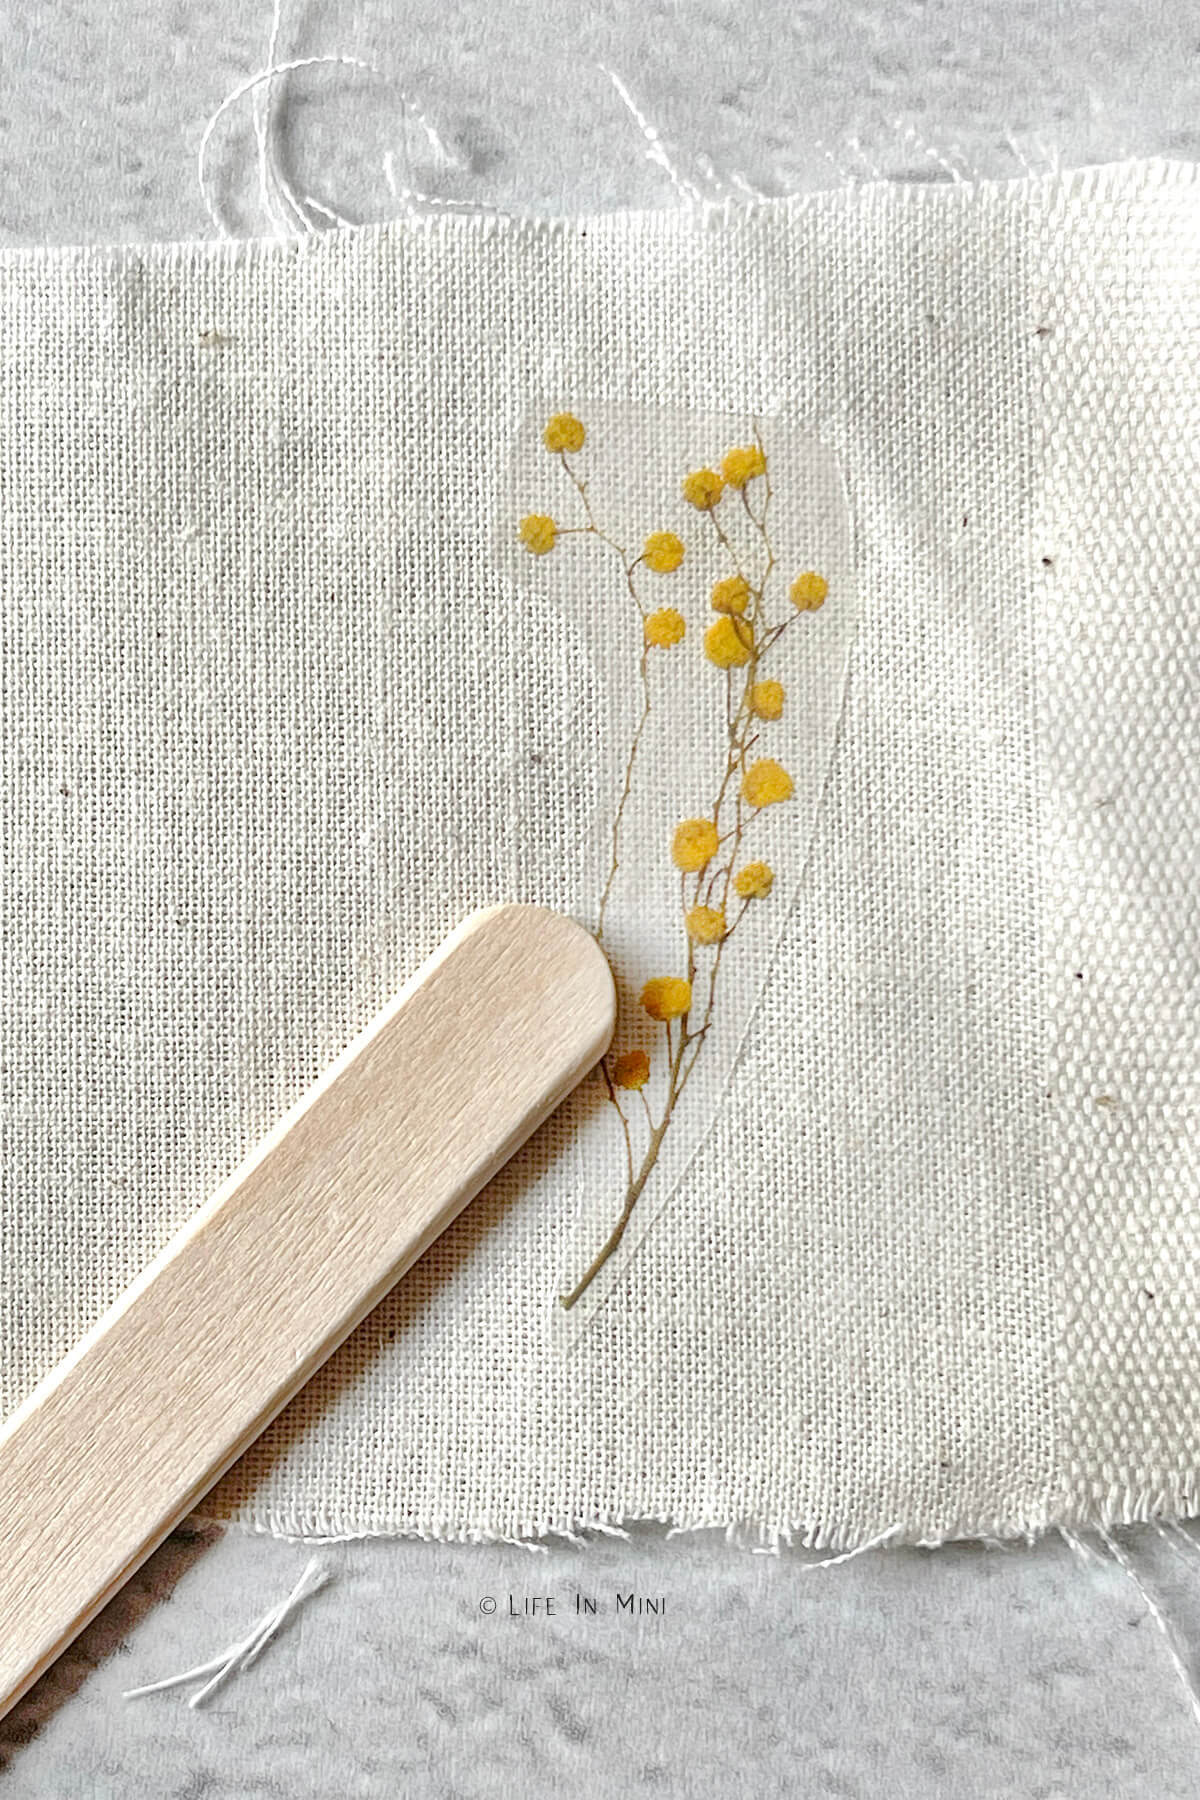 Using a popsicle stick to rub small flowers using rub off transfer onto a beige fabric